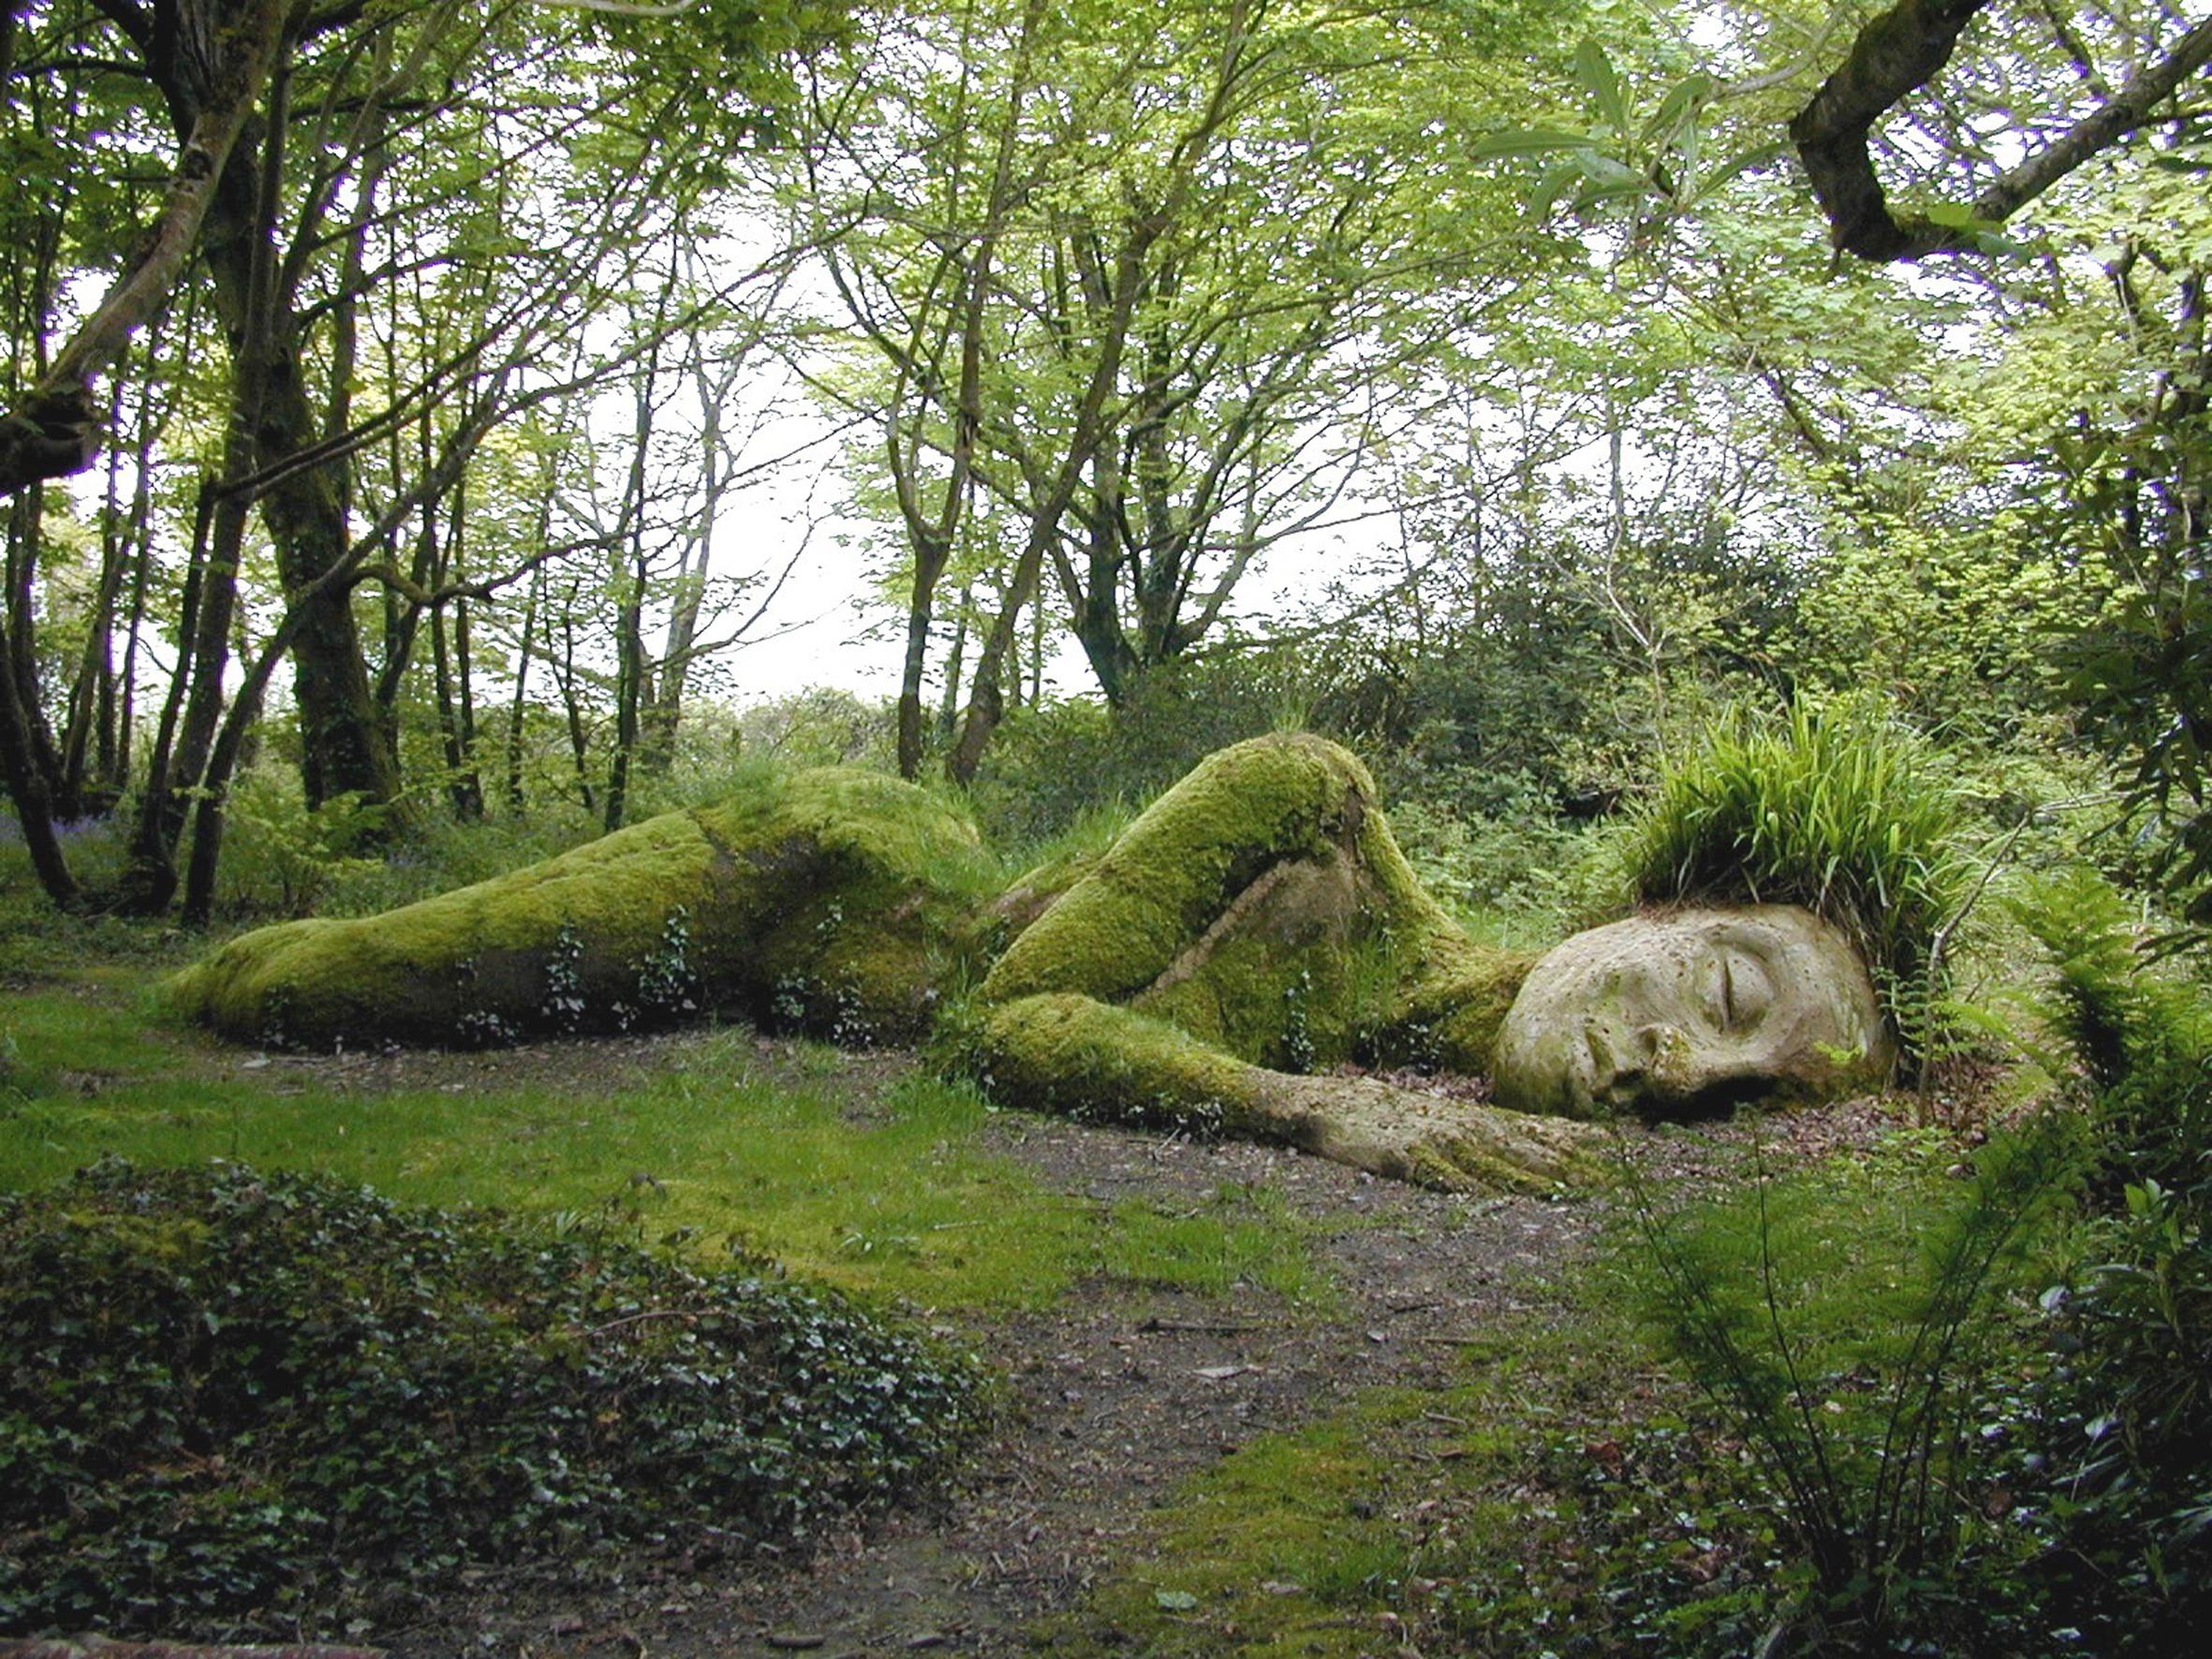 Let their imaginations run wild at the Lost Gardens of Heligan